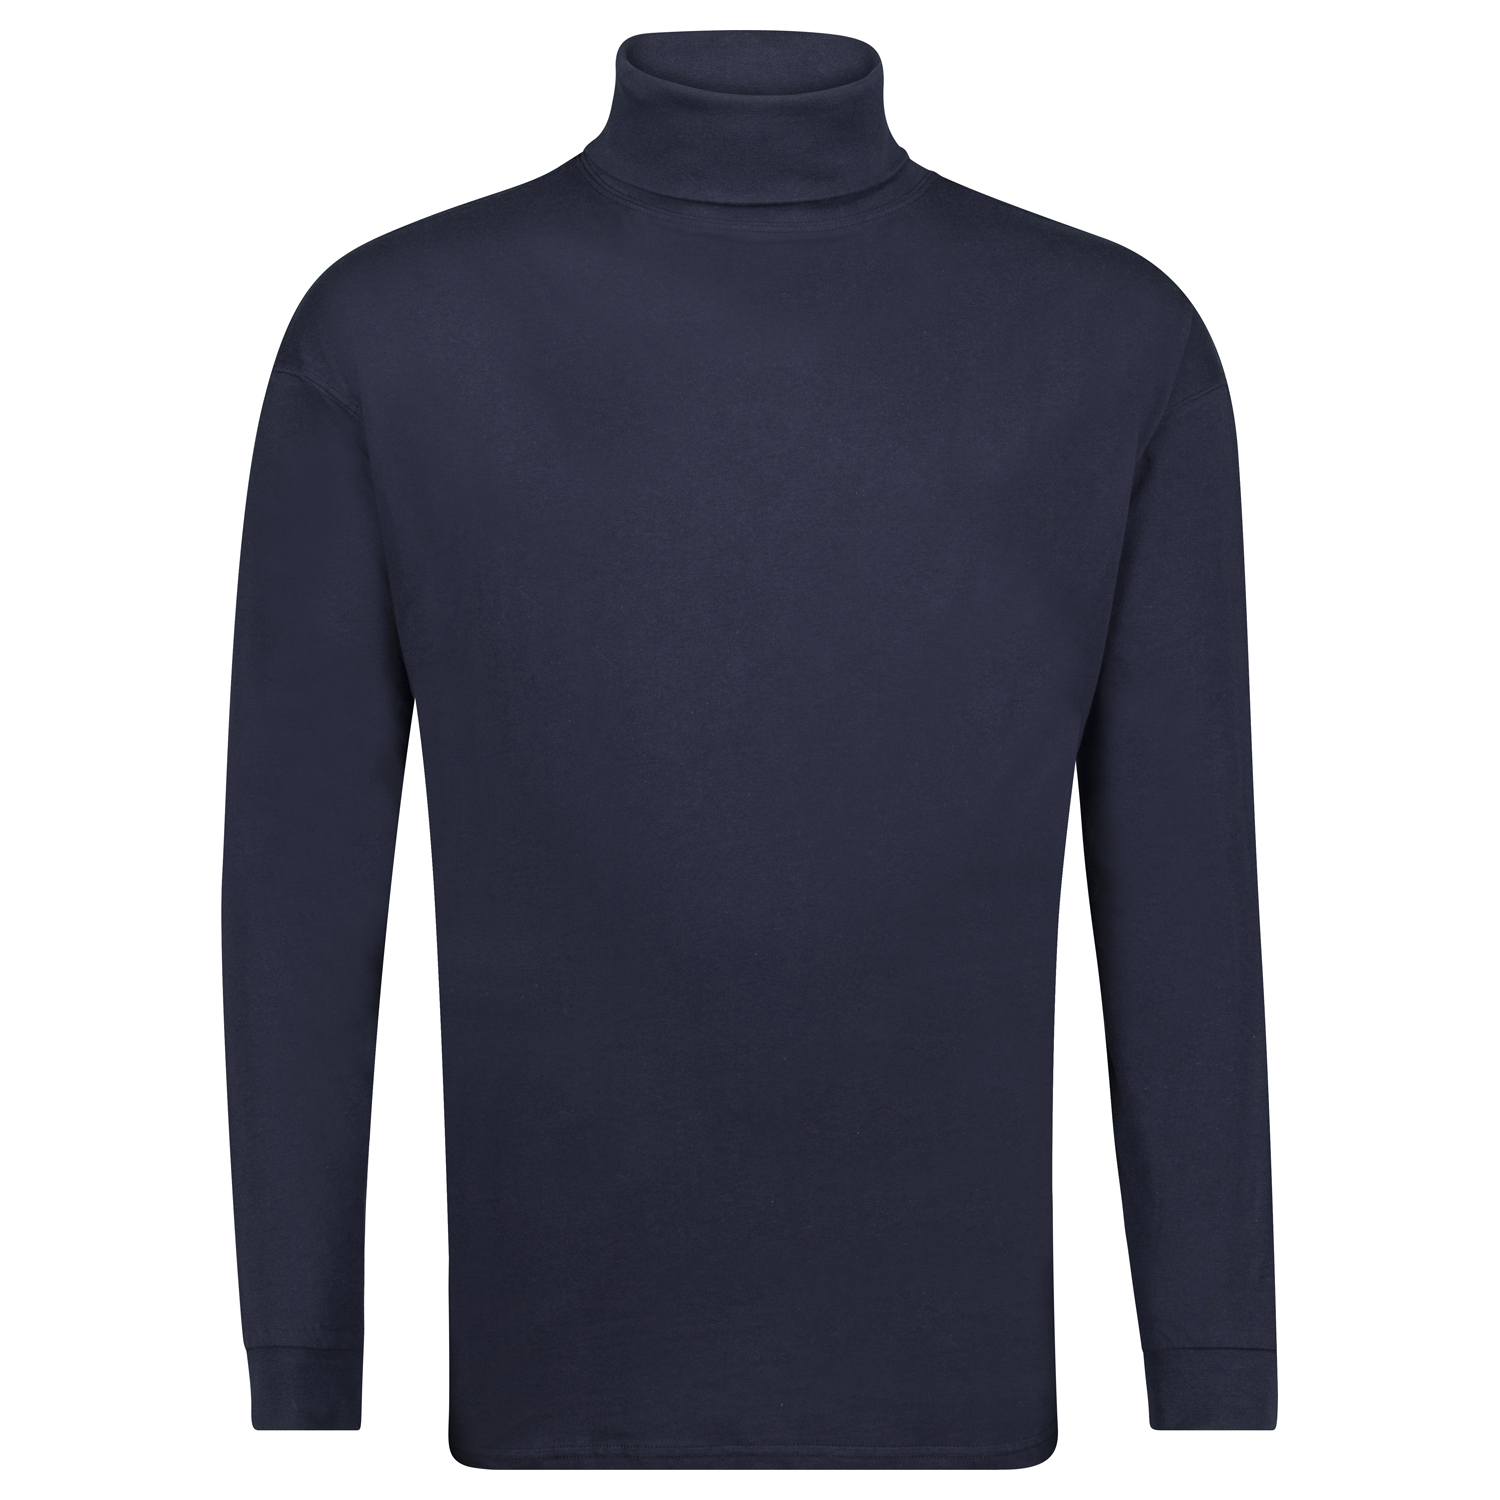 ADAMO longsleeve for men COMFORT FIT in navy with turtle neck up to size 12XL